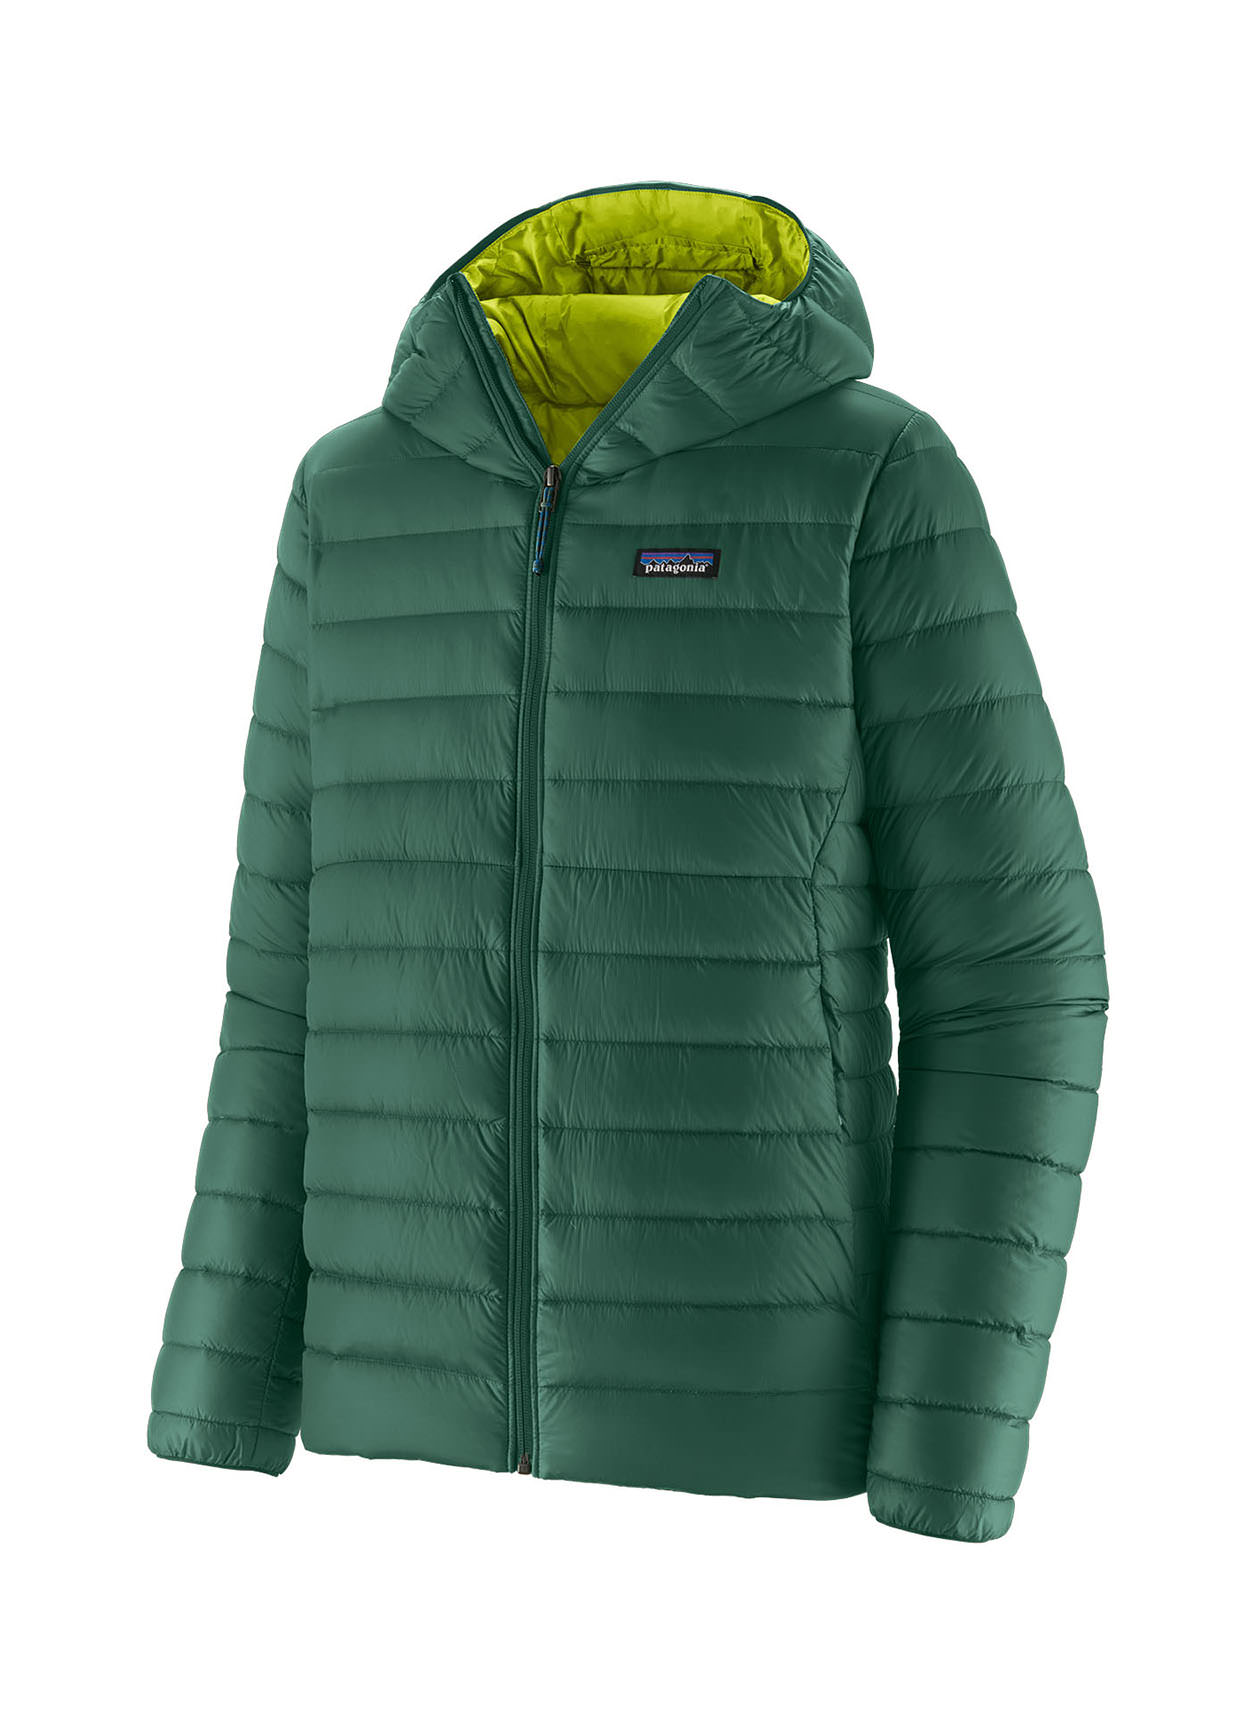 Down Sweater Hoody - Men's from Patagonia